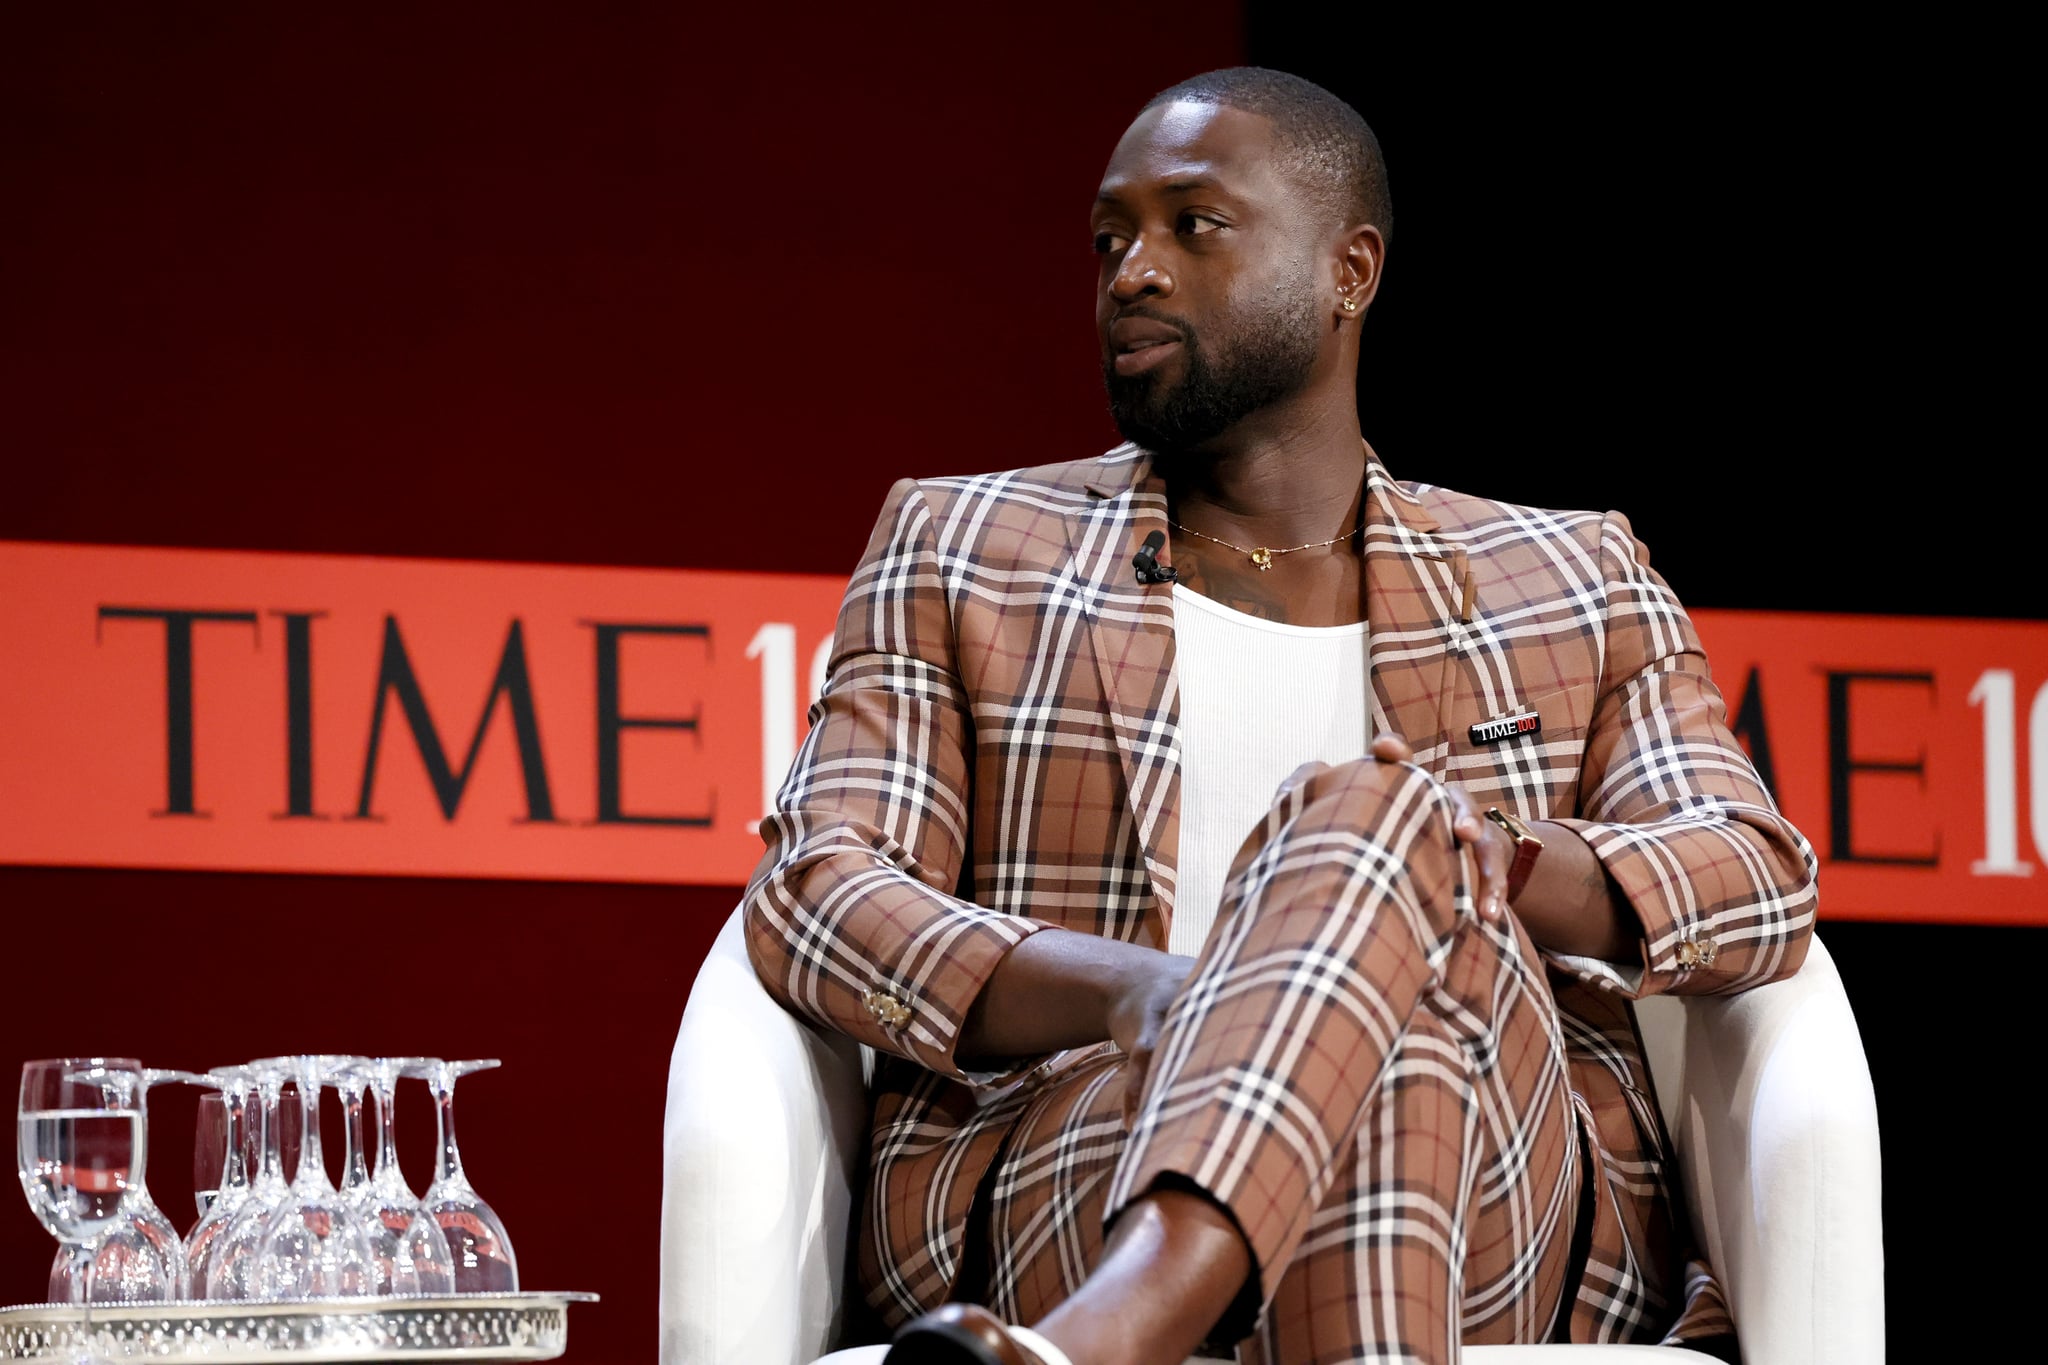 NEW YORK, NEW YORK - JUNE 07: Dwyane Wade speaks onstage at the TIME100 Summit 2022 at Jazz at Lincoln Center on June 7, 2022 in New York City. (Photo by Jemal Countess/Getty Images for TIME)